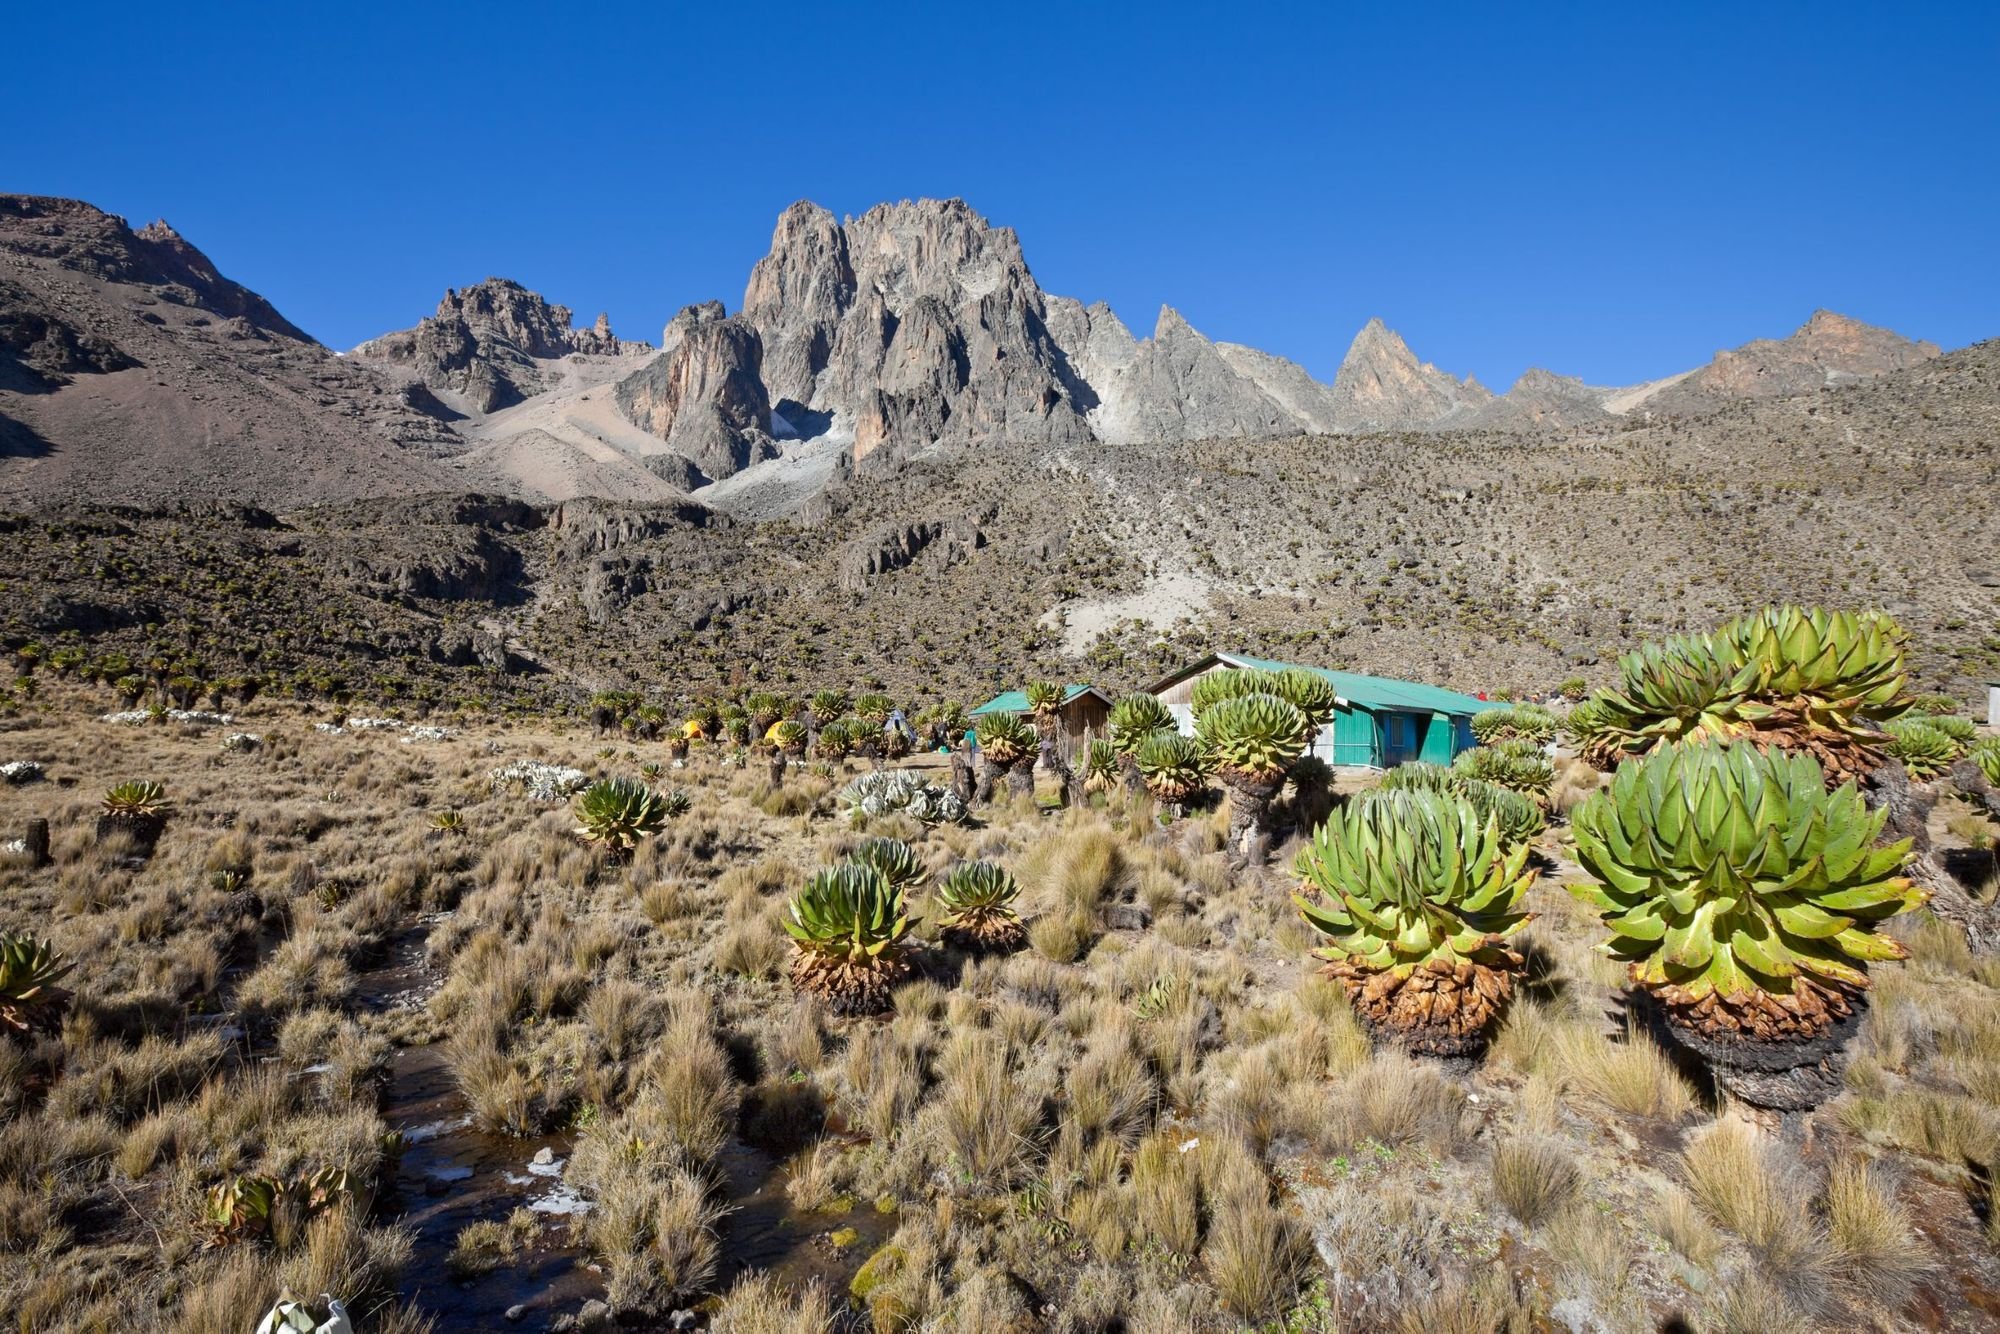 Shipton's Camp is located on the north side of Mt. Kenya, at an altitude of 4238m. Photo: Getty